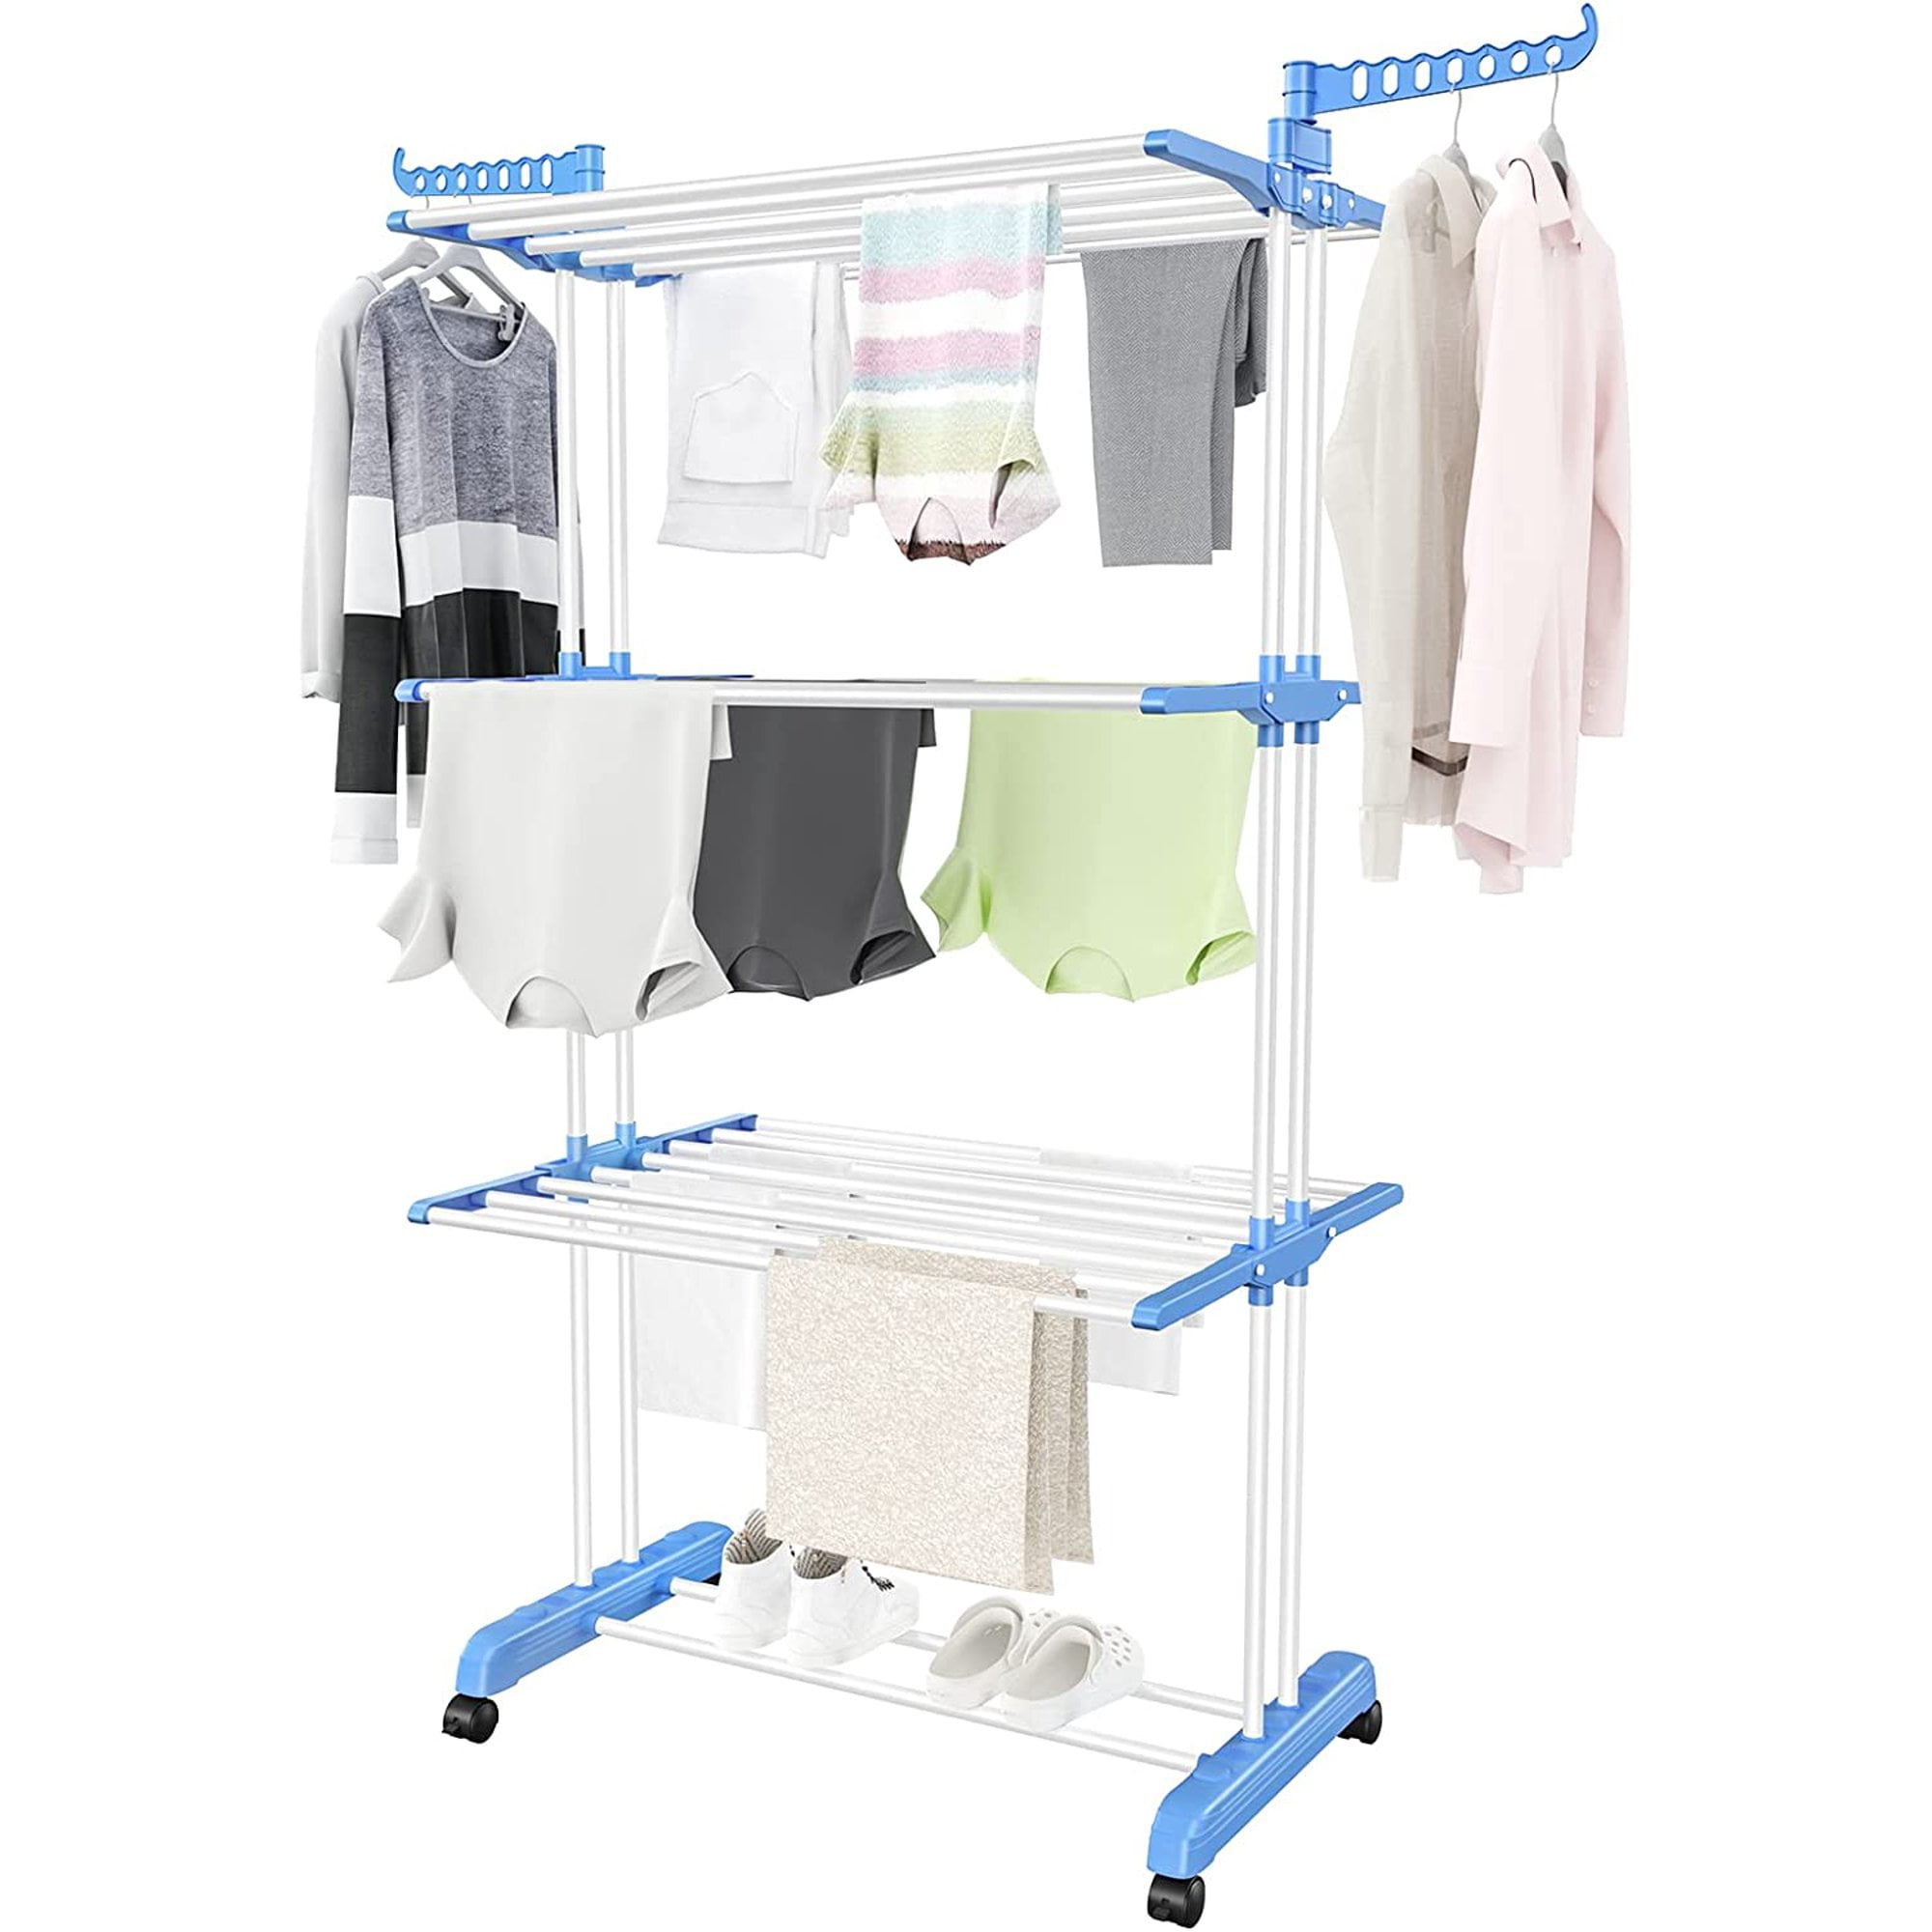 Global Phoenix Clothes Drying Rack Rolling Collapsible Laundry Dryer Hanger  Stand Rail Shelve Wardrobe Clothing Drying Racks